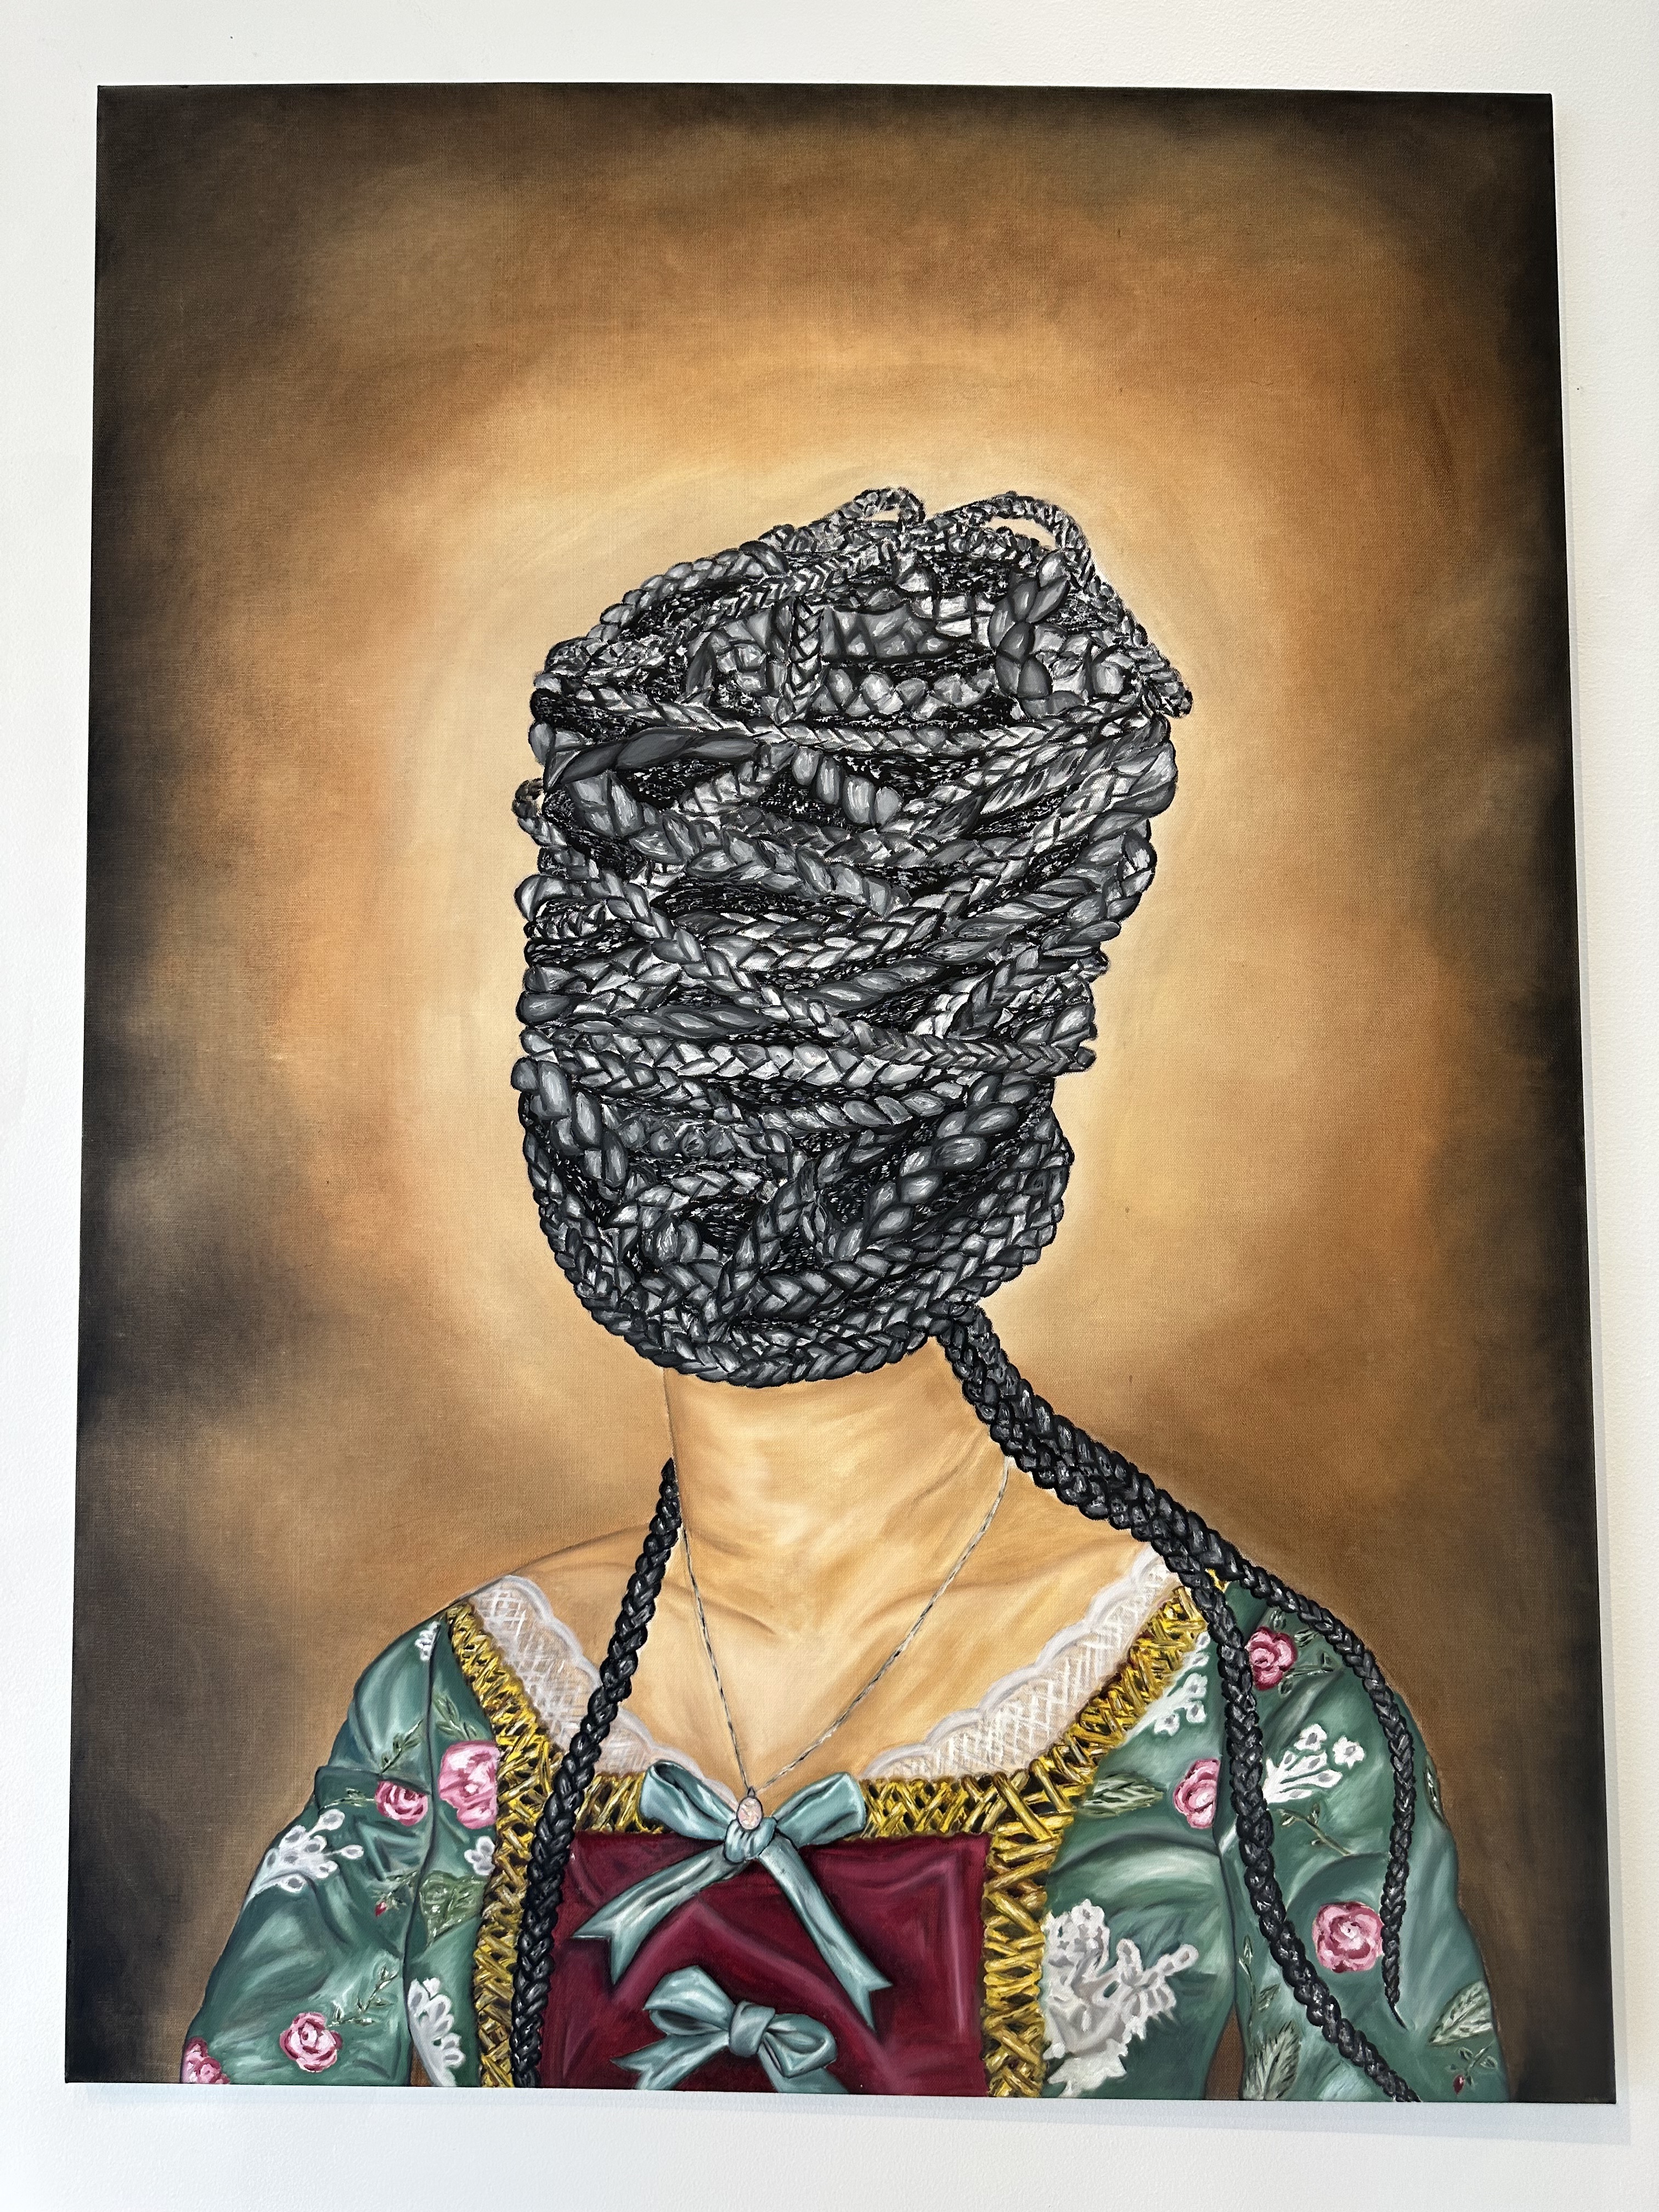 Image of painting of a woman with braids covering her head